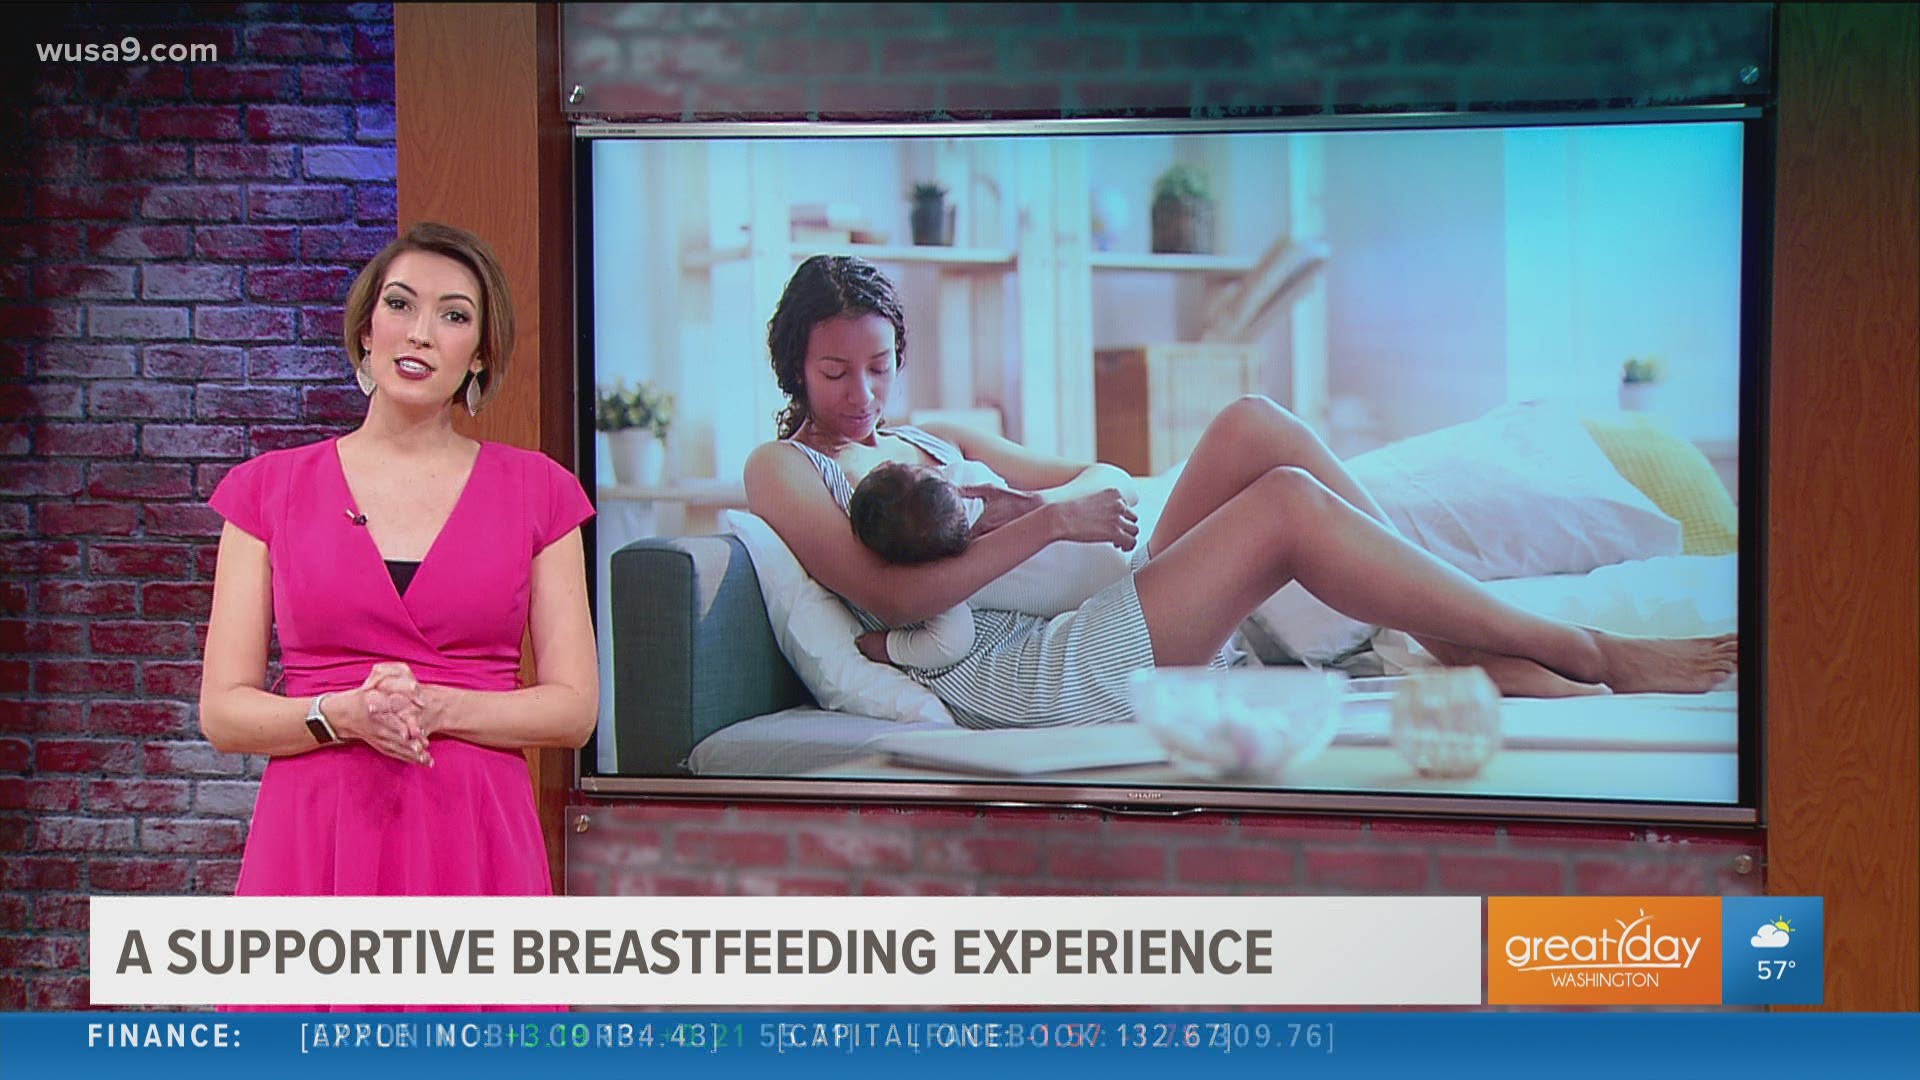 Gaby Cavins with Villyge shares how important it is to have a supportive breastfeeding experience for moms on young children.